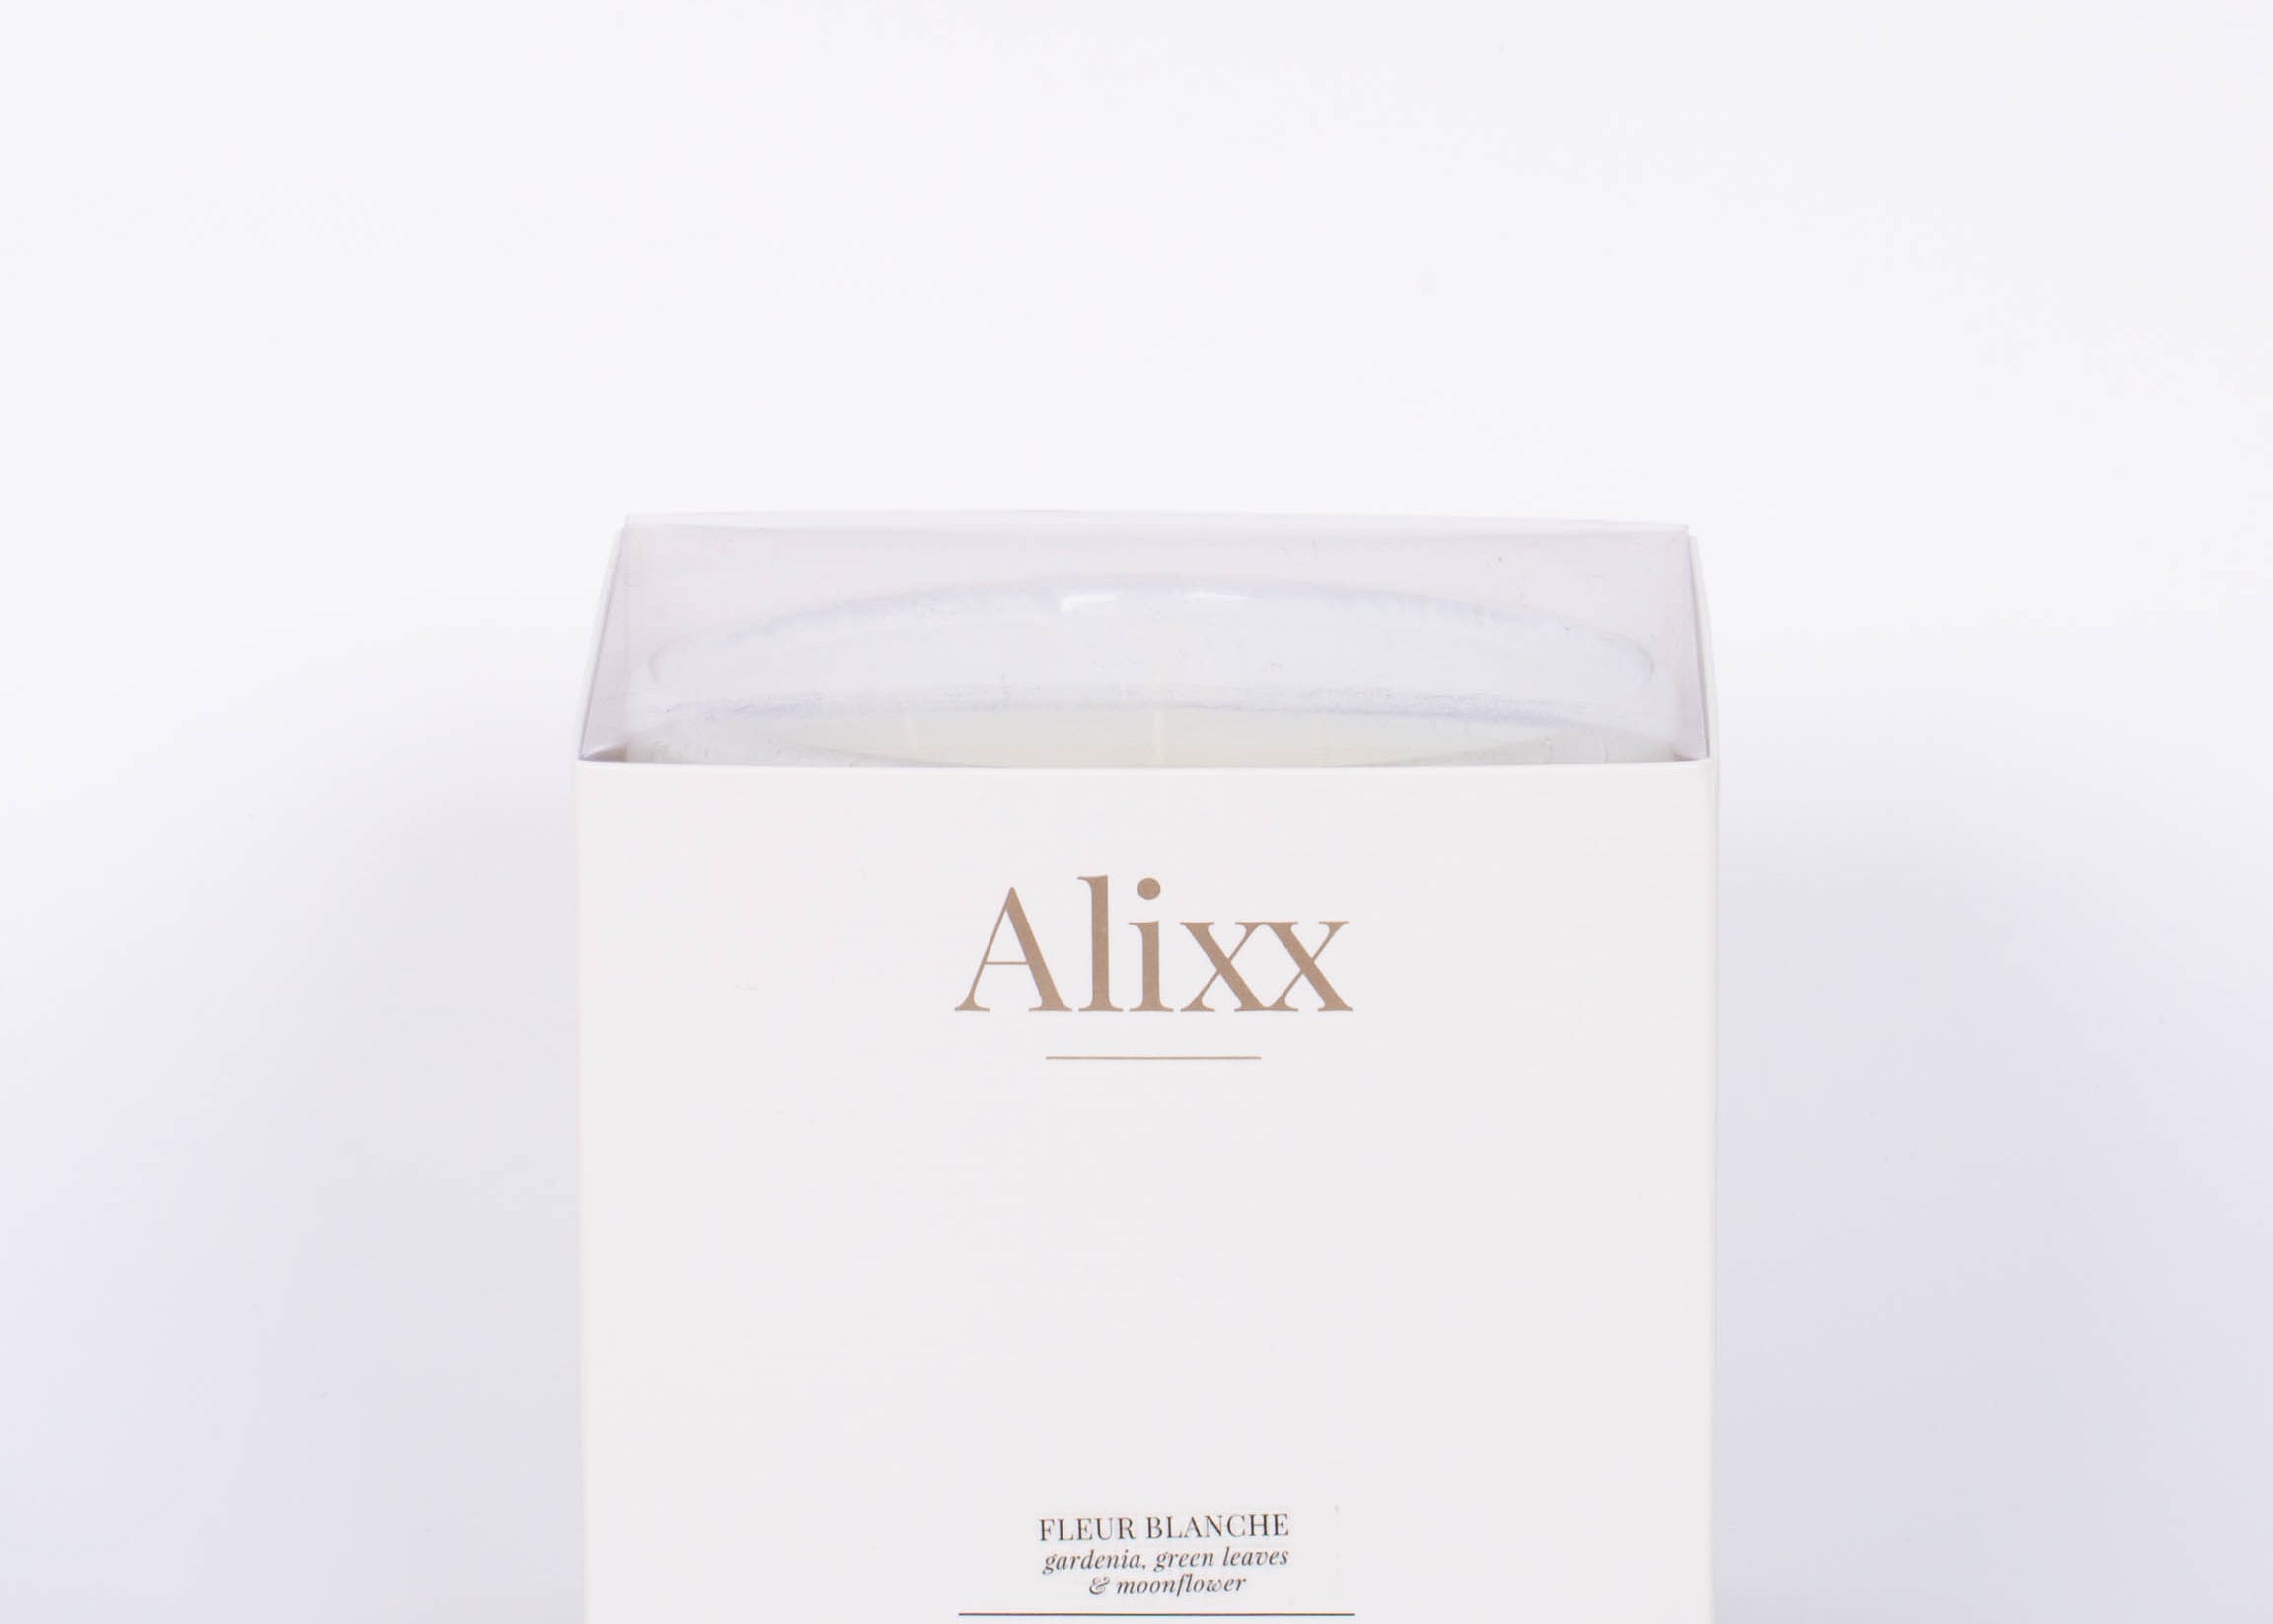 Box for Fleur Blanche Cylindre white bubble glass candle by Alixx with moonflower and violet aroma. 